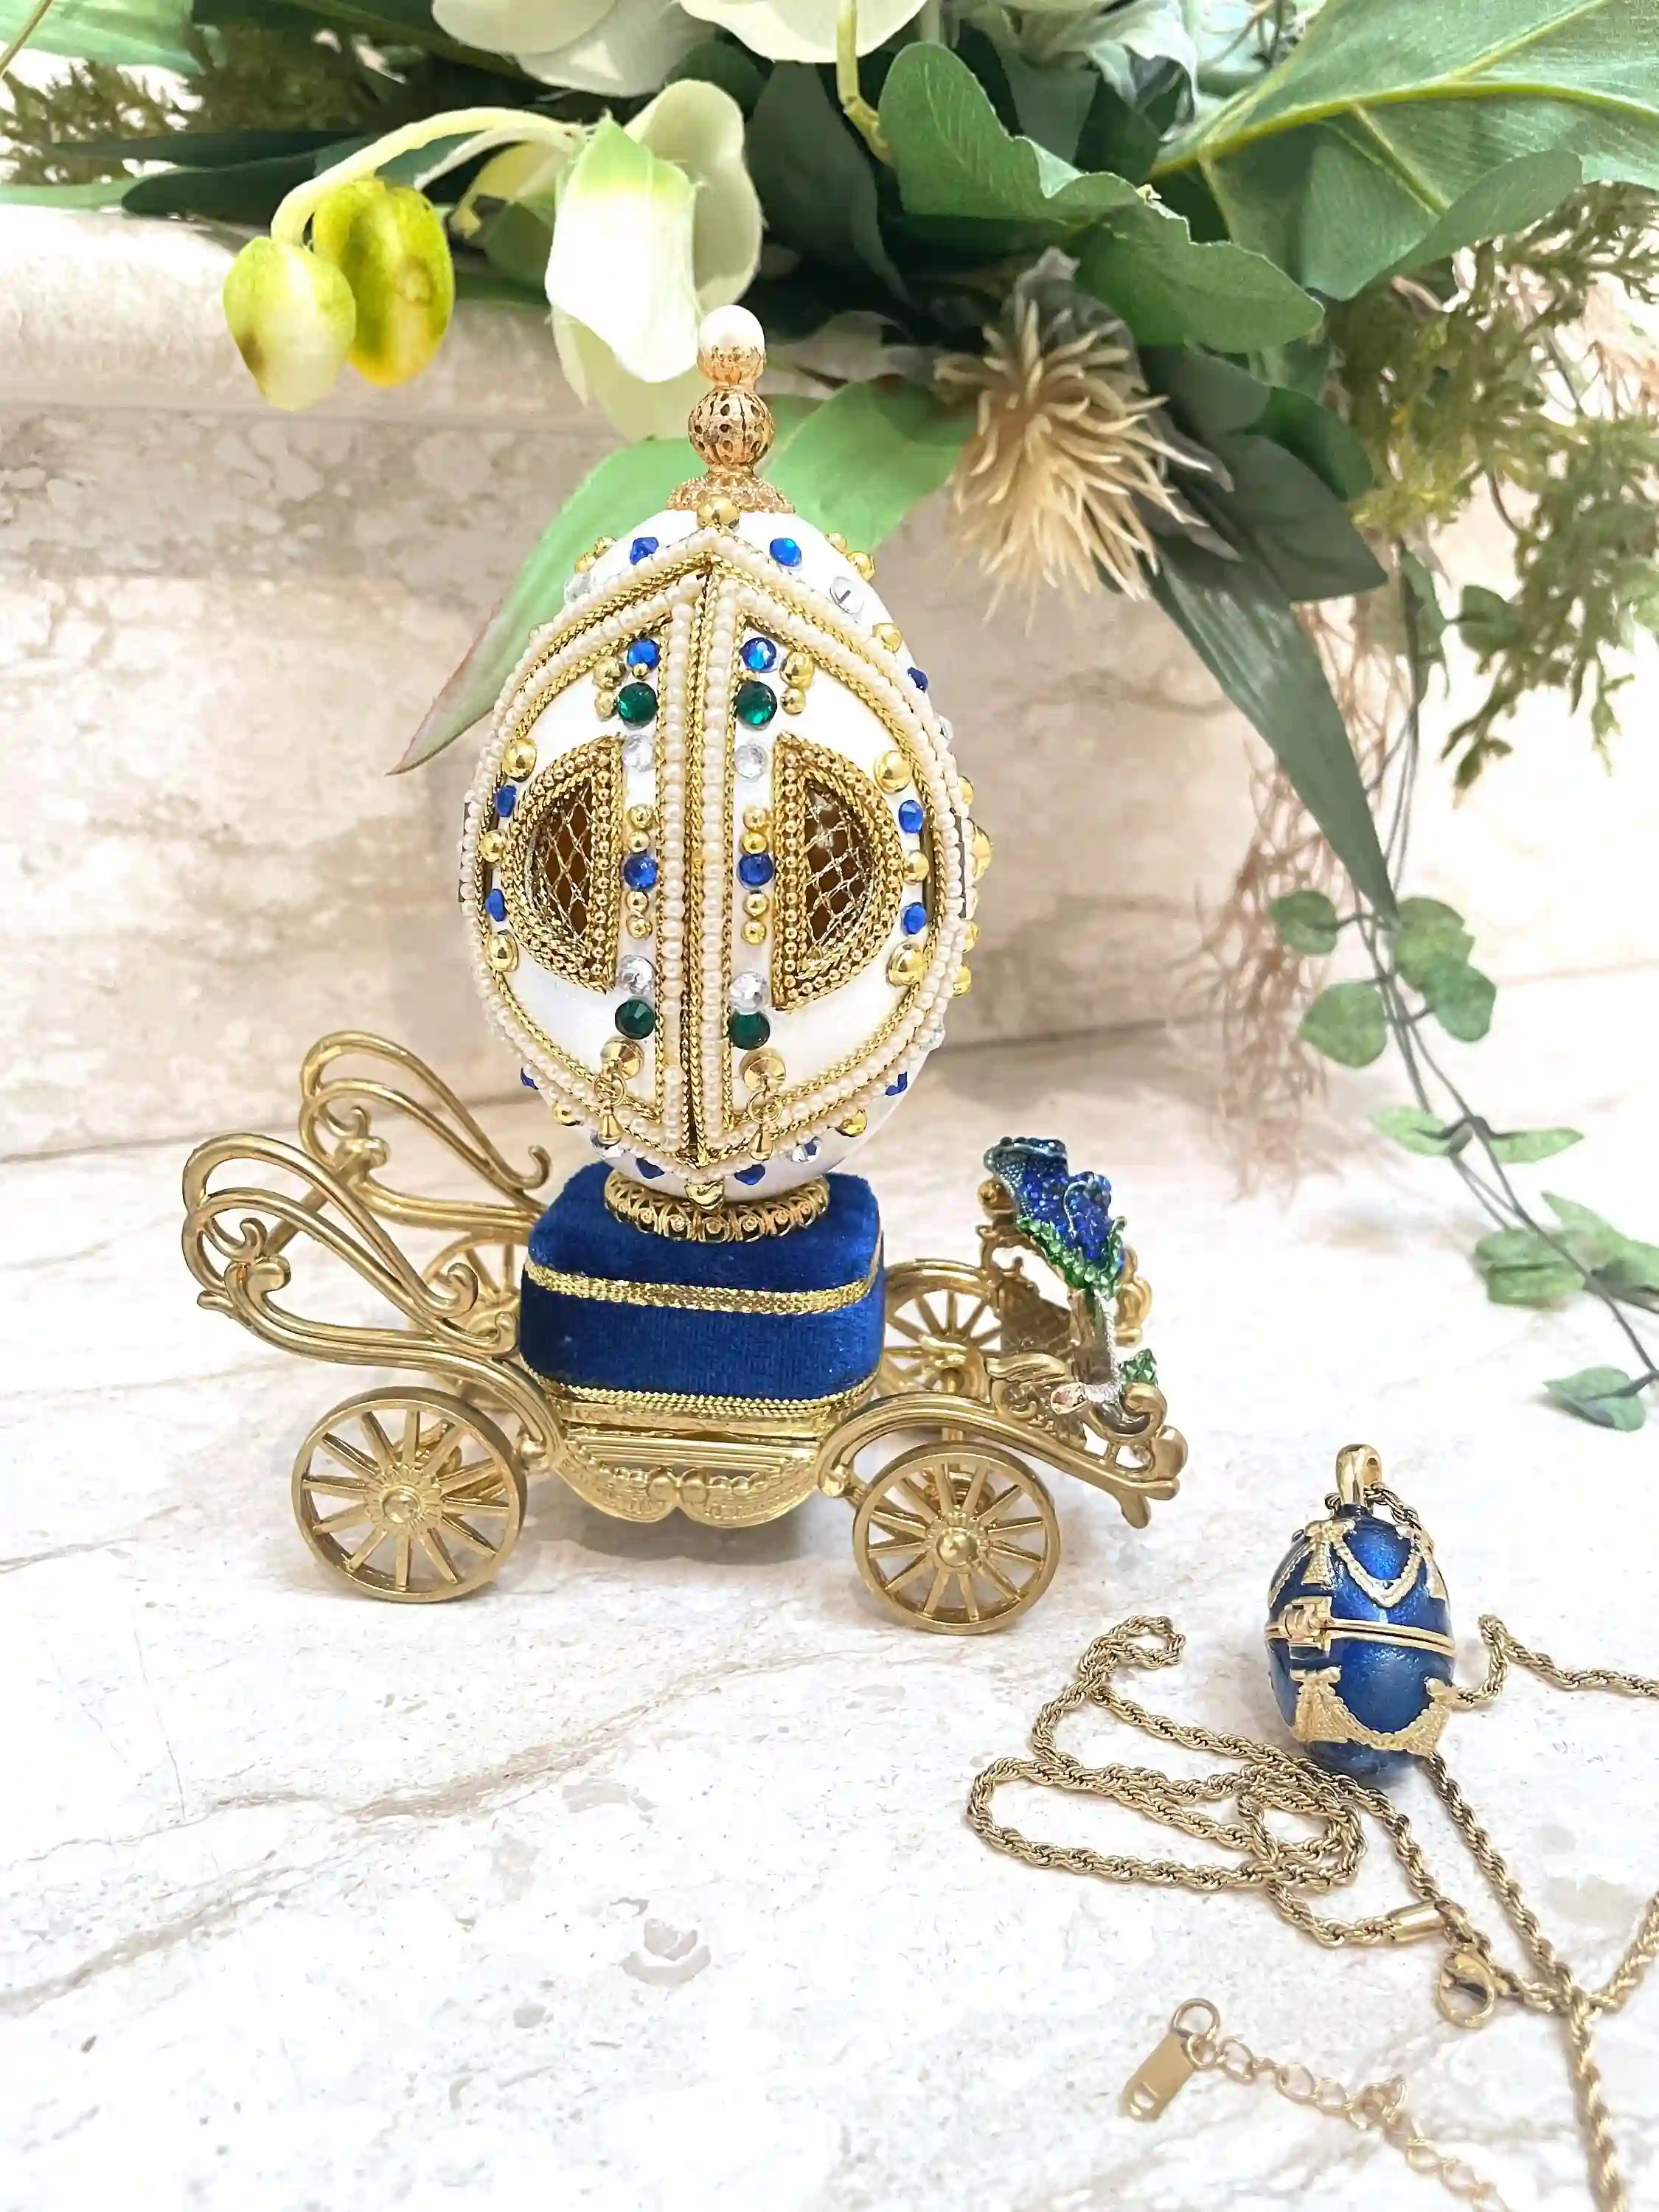 2002 REAL Faberge Egg Art Musical Gifts - 21st Birthday Gift from Dad - 21 Anniversary gift - Wife gift ideas 21 year old gift her 24k GOLD 